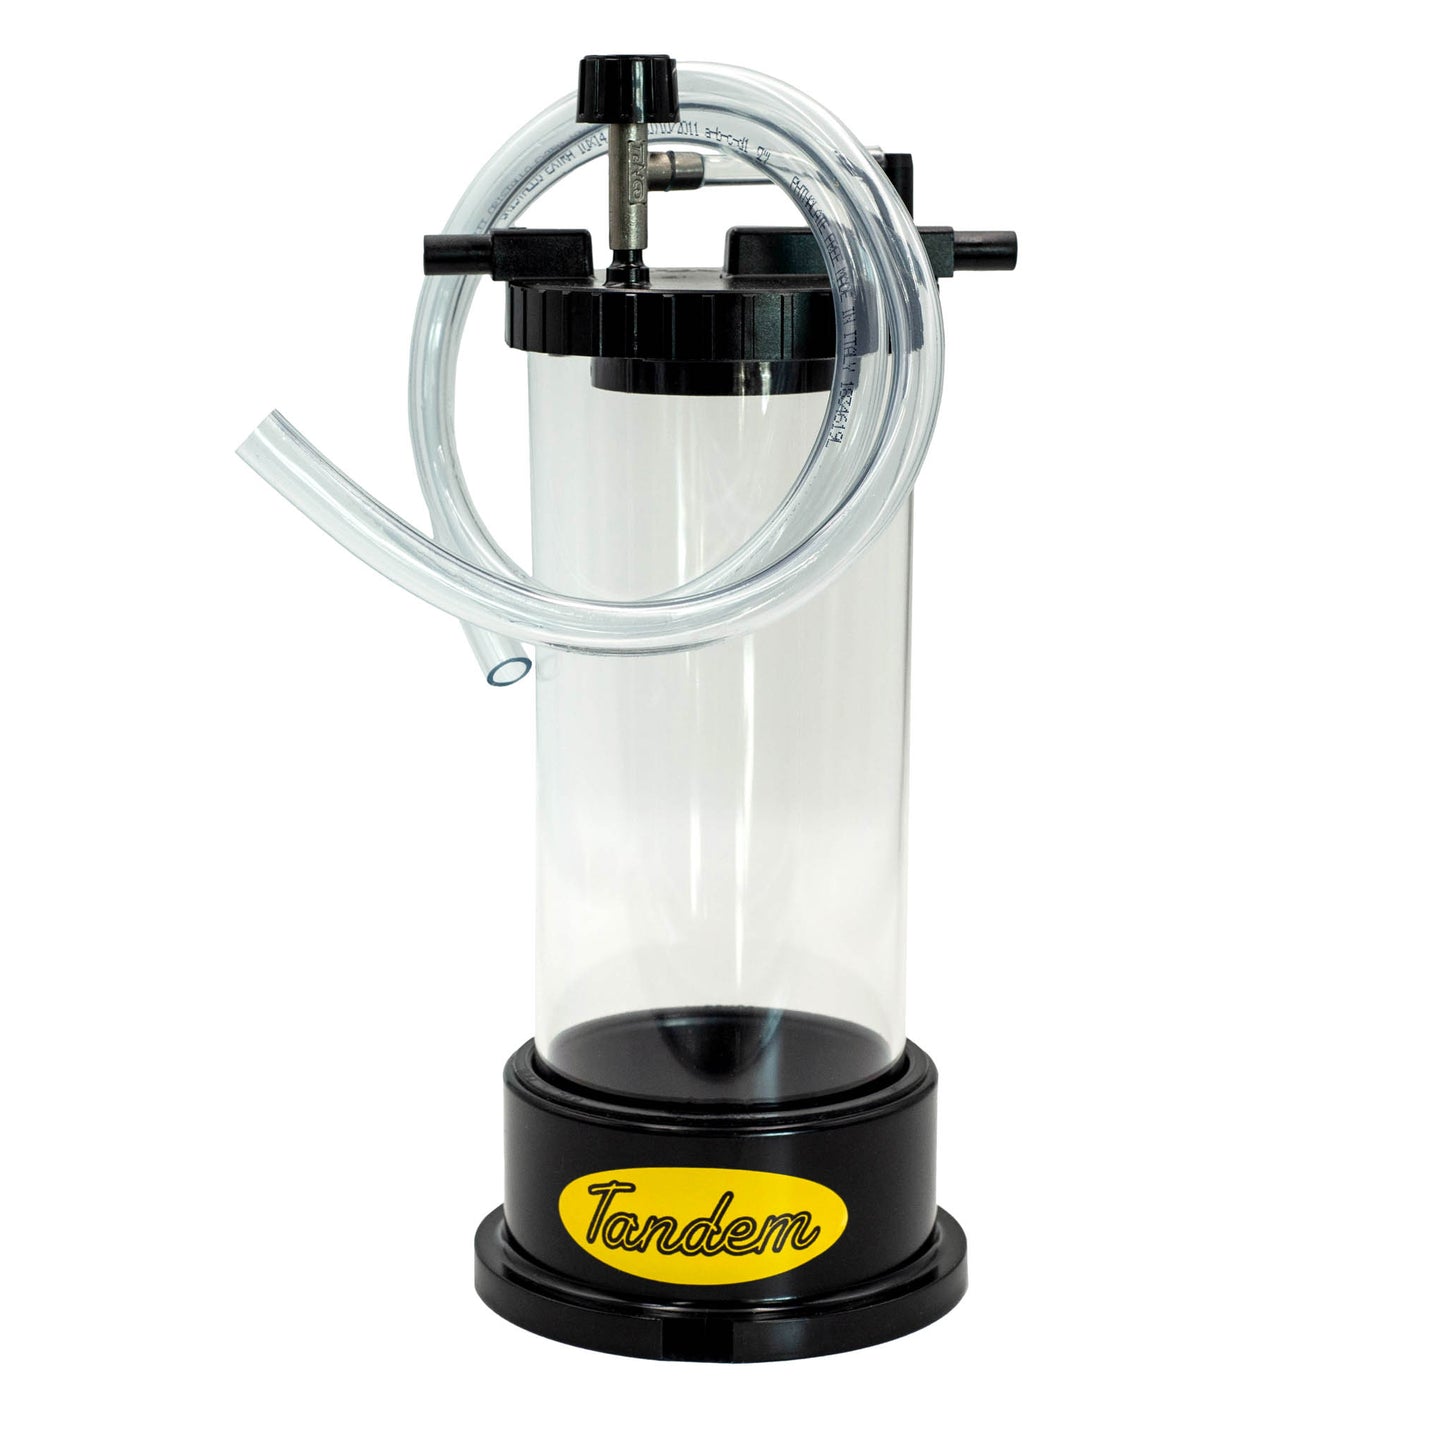 Elmatic tandem filter housing works with the enolmatic filler. This filter housing allows you to filter wine, olive oil, spirits, syrup, and fruit juices depending on the filter cartridges you use.